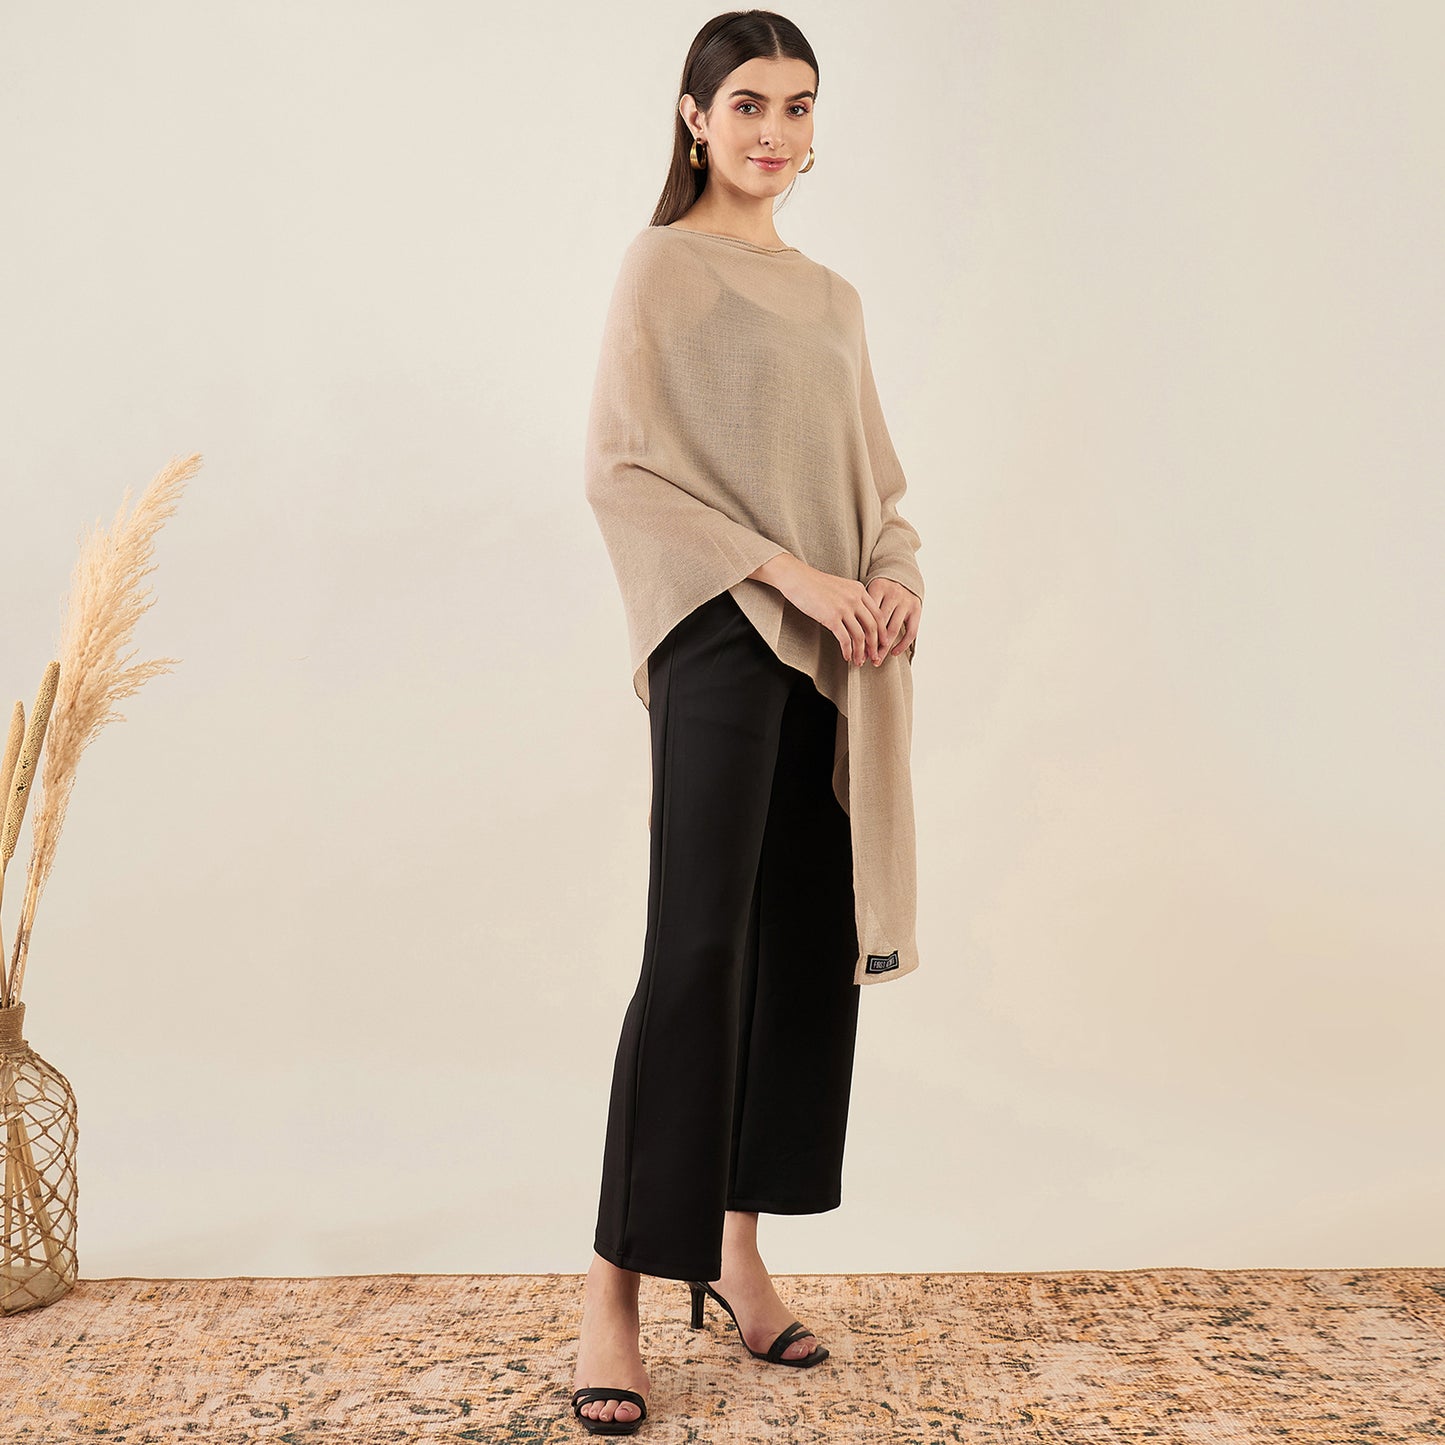 Almond Ombre Asymmetrical Embellished Cashmere Poncho